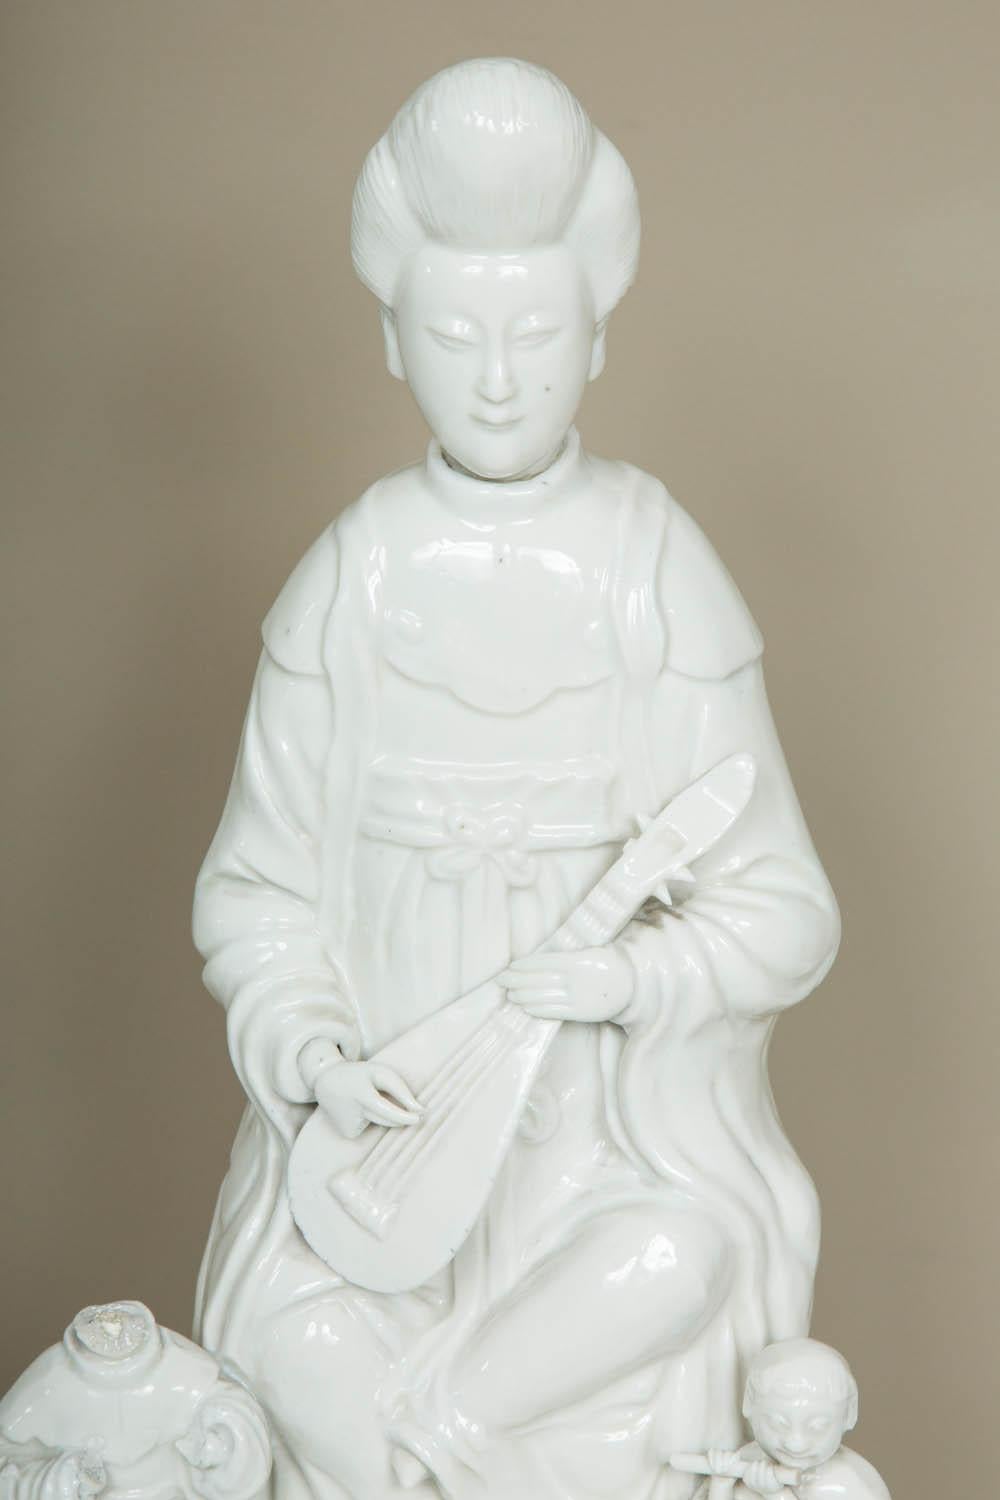 A Kangxi period (1662-1722) Blanc de Chine porcelain model of a seated Guanyin playing a music instrument, at her side two children playing the flute and wearing european costumes; from the kilns in Dehua, Fujian Province.
Condition: neck reglued